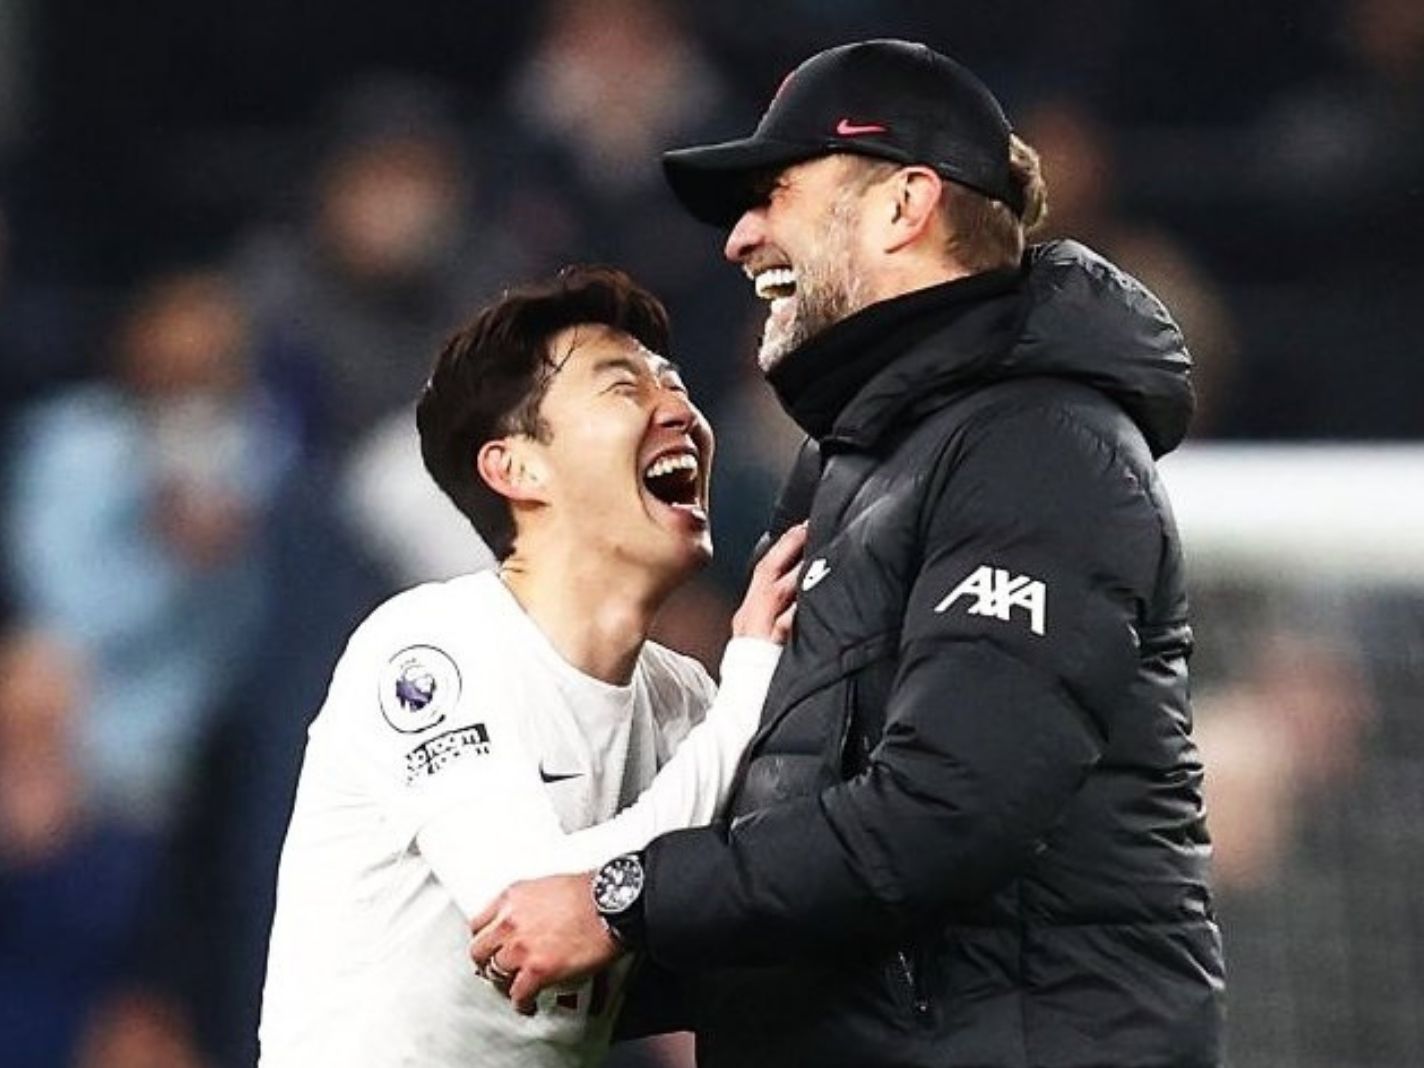 Jurgen Klopp and Son Heung-min smiling together after the final whistle